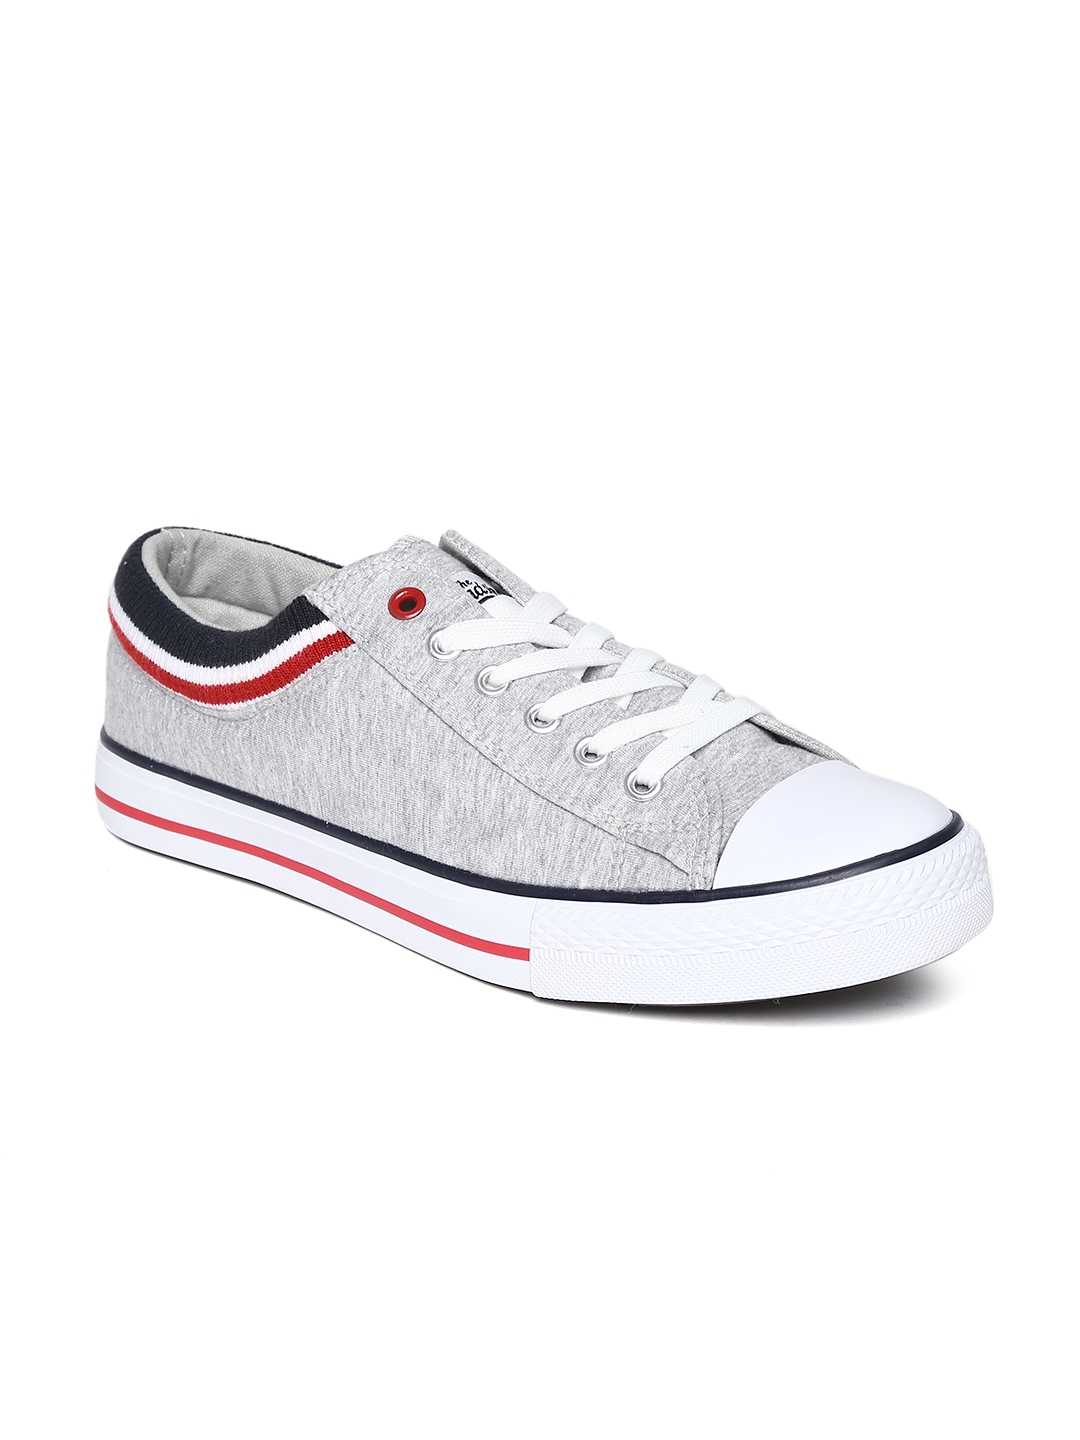 Buy Roadster Men Grey Casual Shoes - Casual Shoes for Men 722879 | Myntra